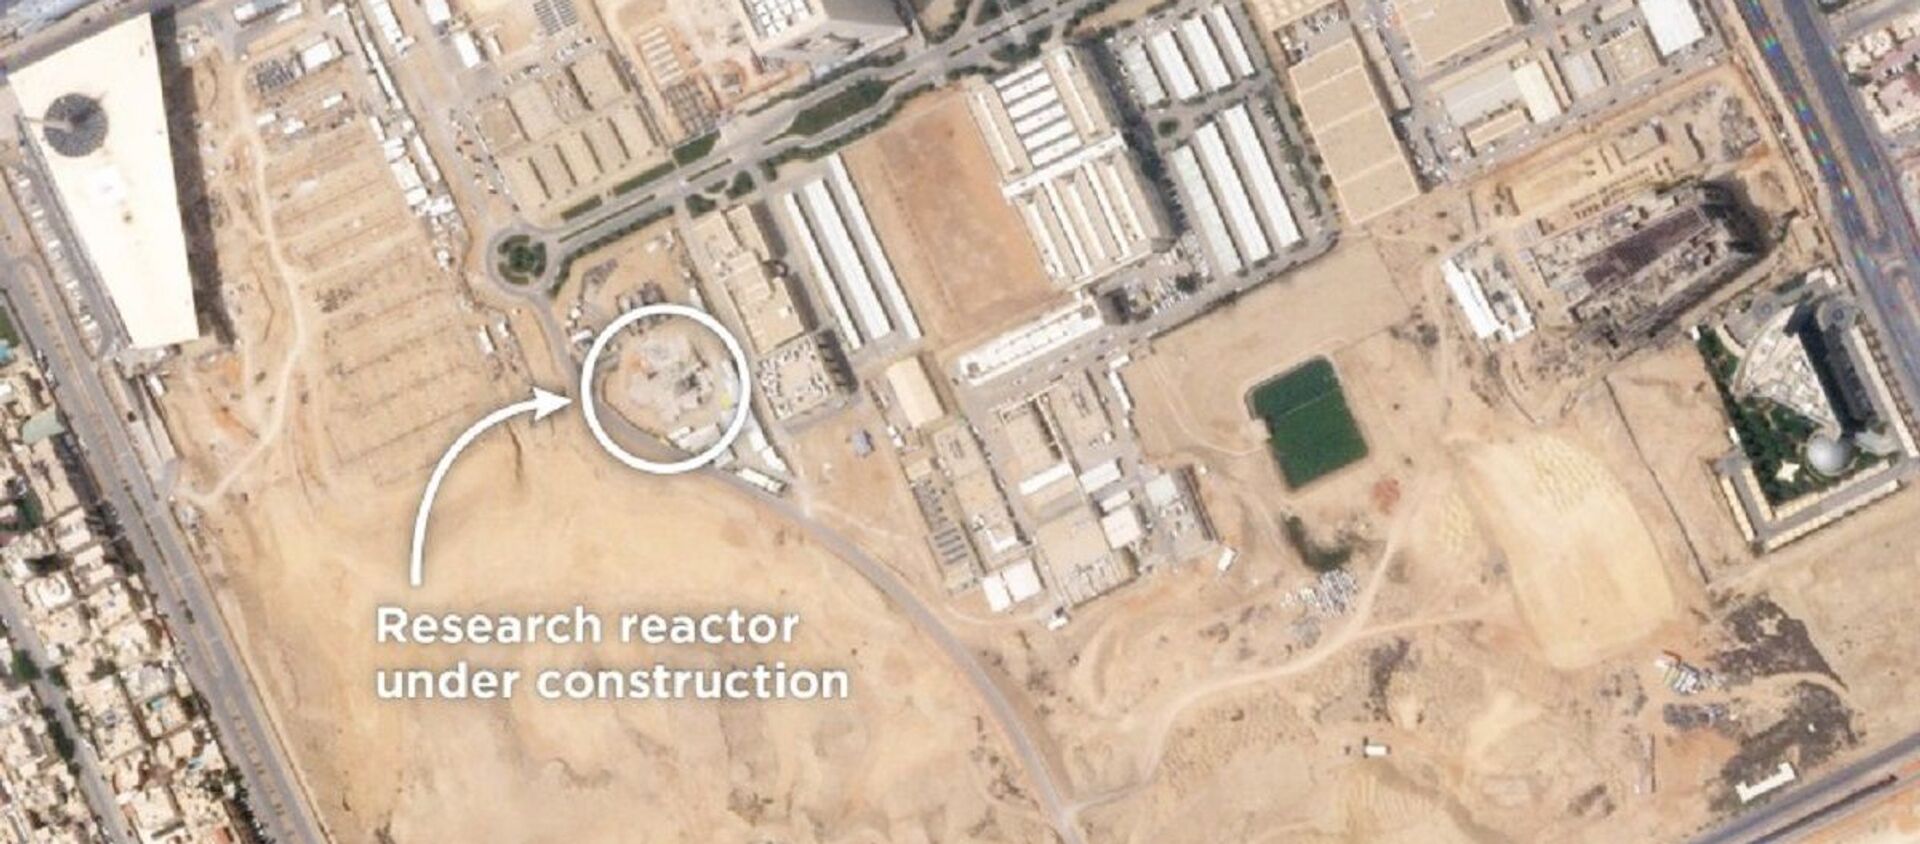 Satellite imagery from the company Planet shows construction of a small research reactor at the King Abdulaziz City for Science and Technology in Riyadh - Sputnik International, 1920, 09.07.2021